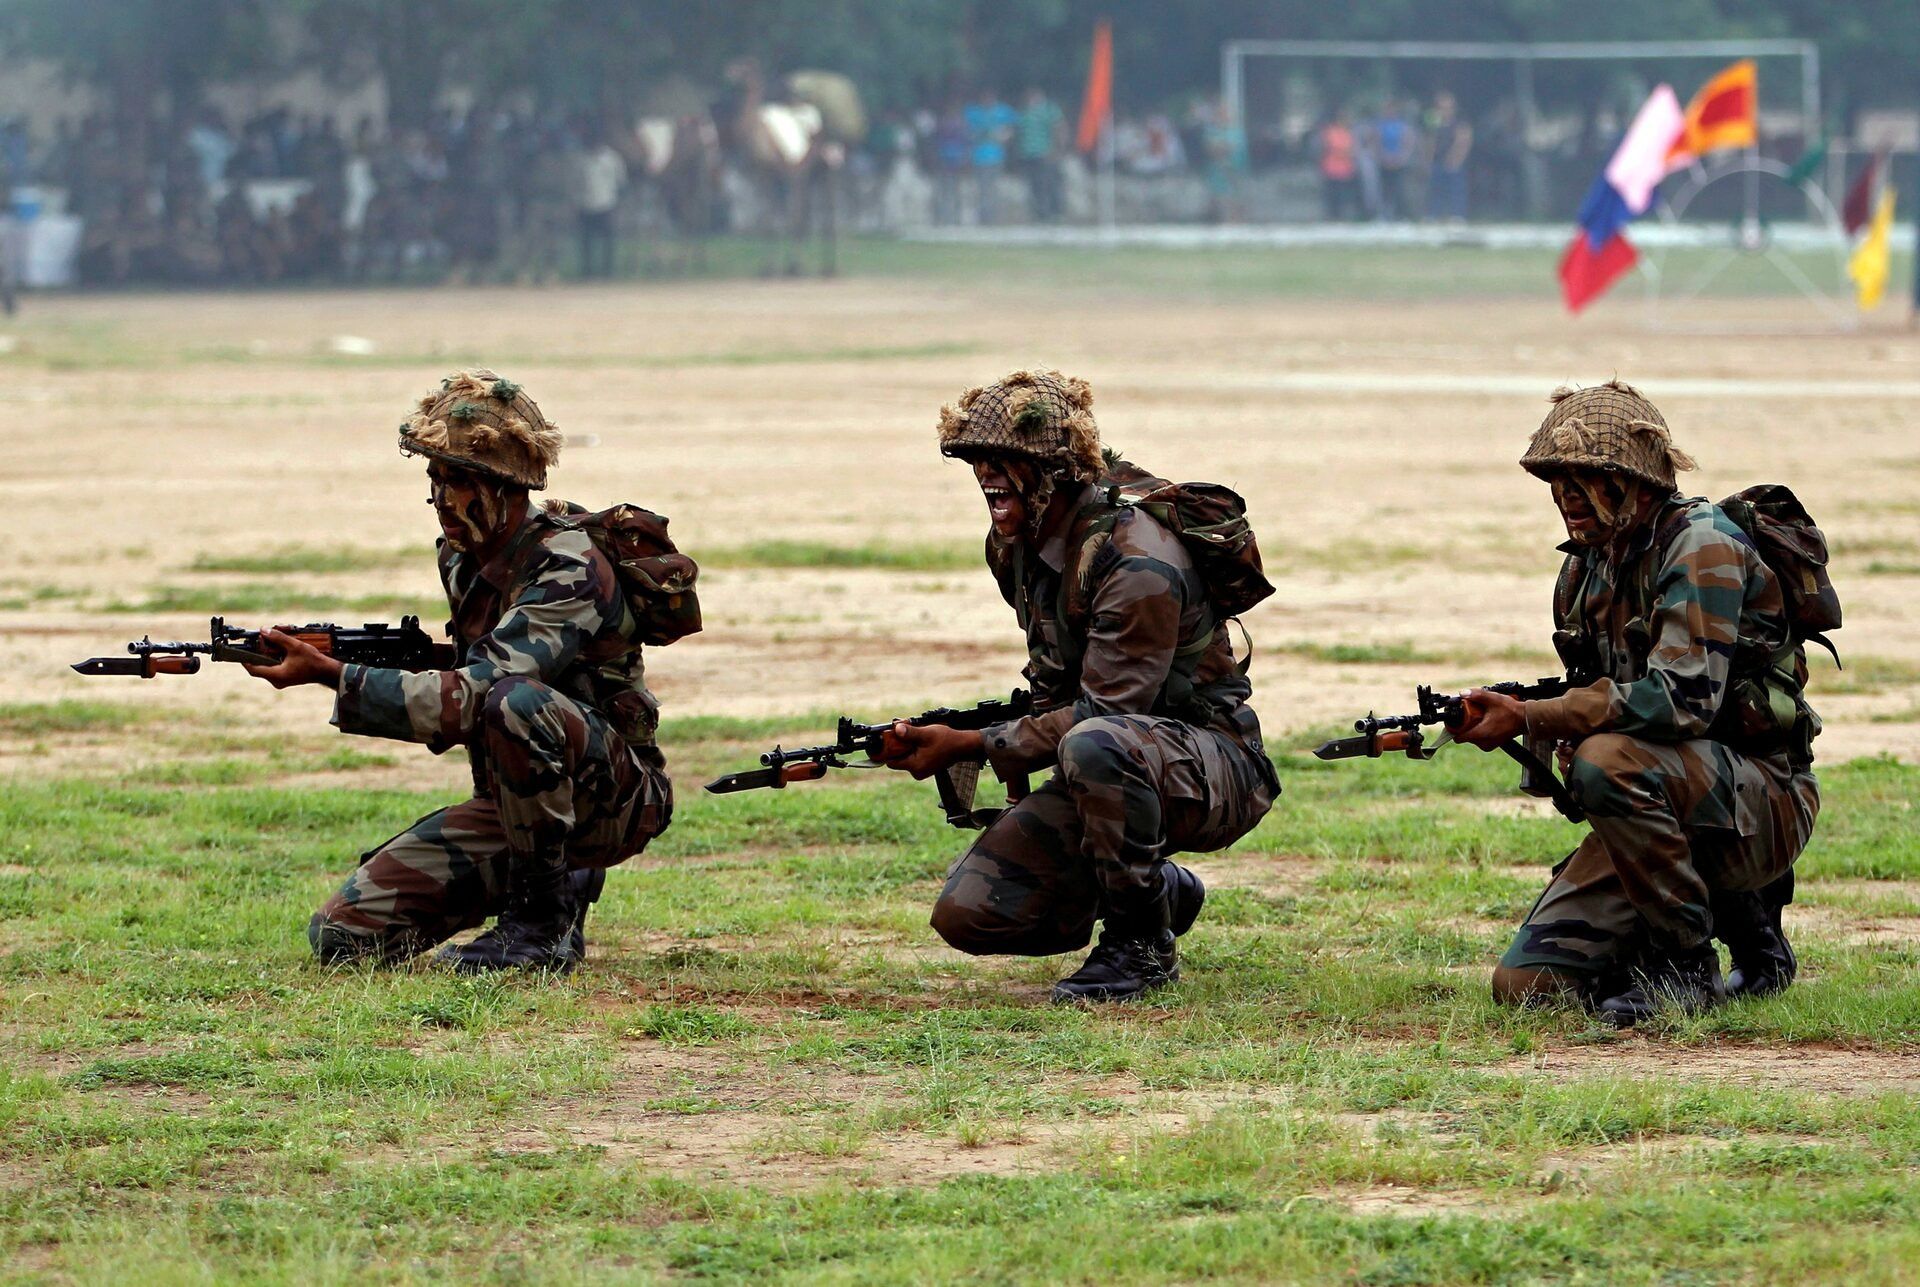 Indian Army soldiers participate in a war exercise during a two-day "Know Your Army" exhibition in Ahmedabad, India, August 19, 2016. 